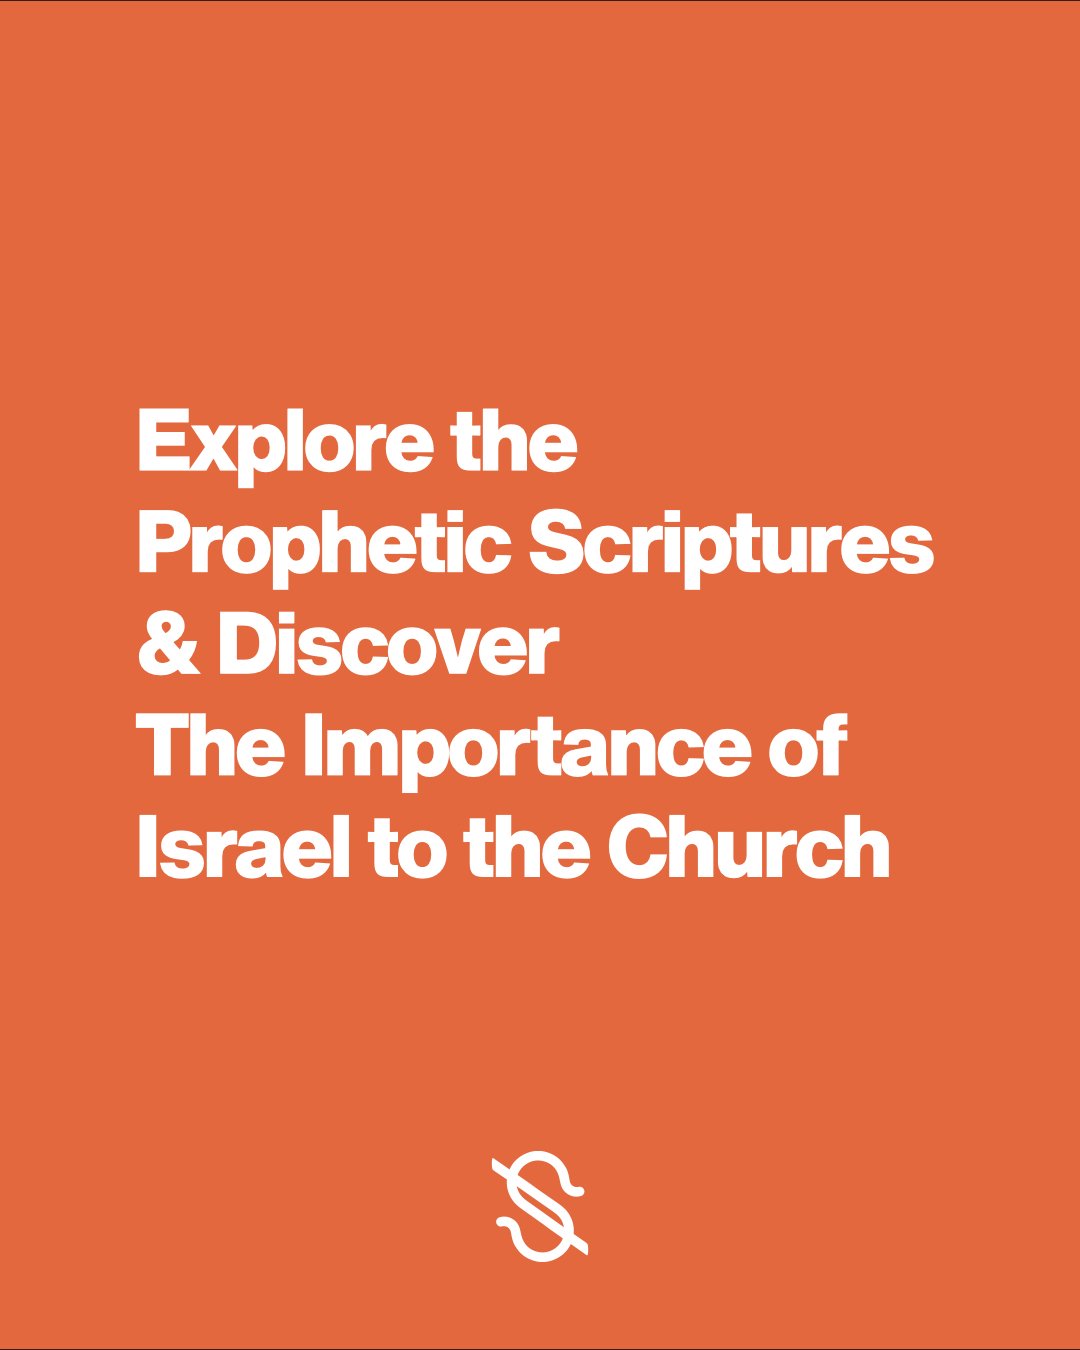 Join Pastors John Carter &amp; Lee Wilson as they delve into the prophetic significance of current events in Israel. Understand the power of prayer for nations.
--
Watch the full episode at theshepherdsnetwork.com
#BiblicalProphecy #Israel